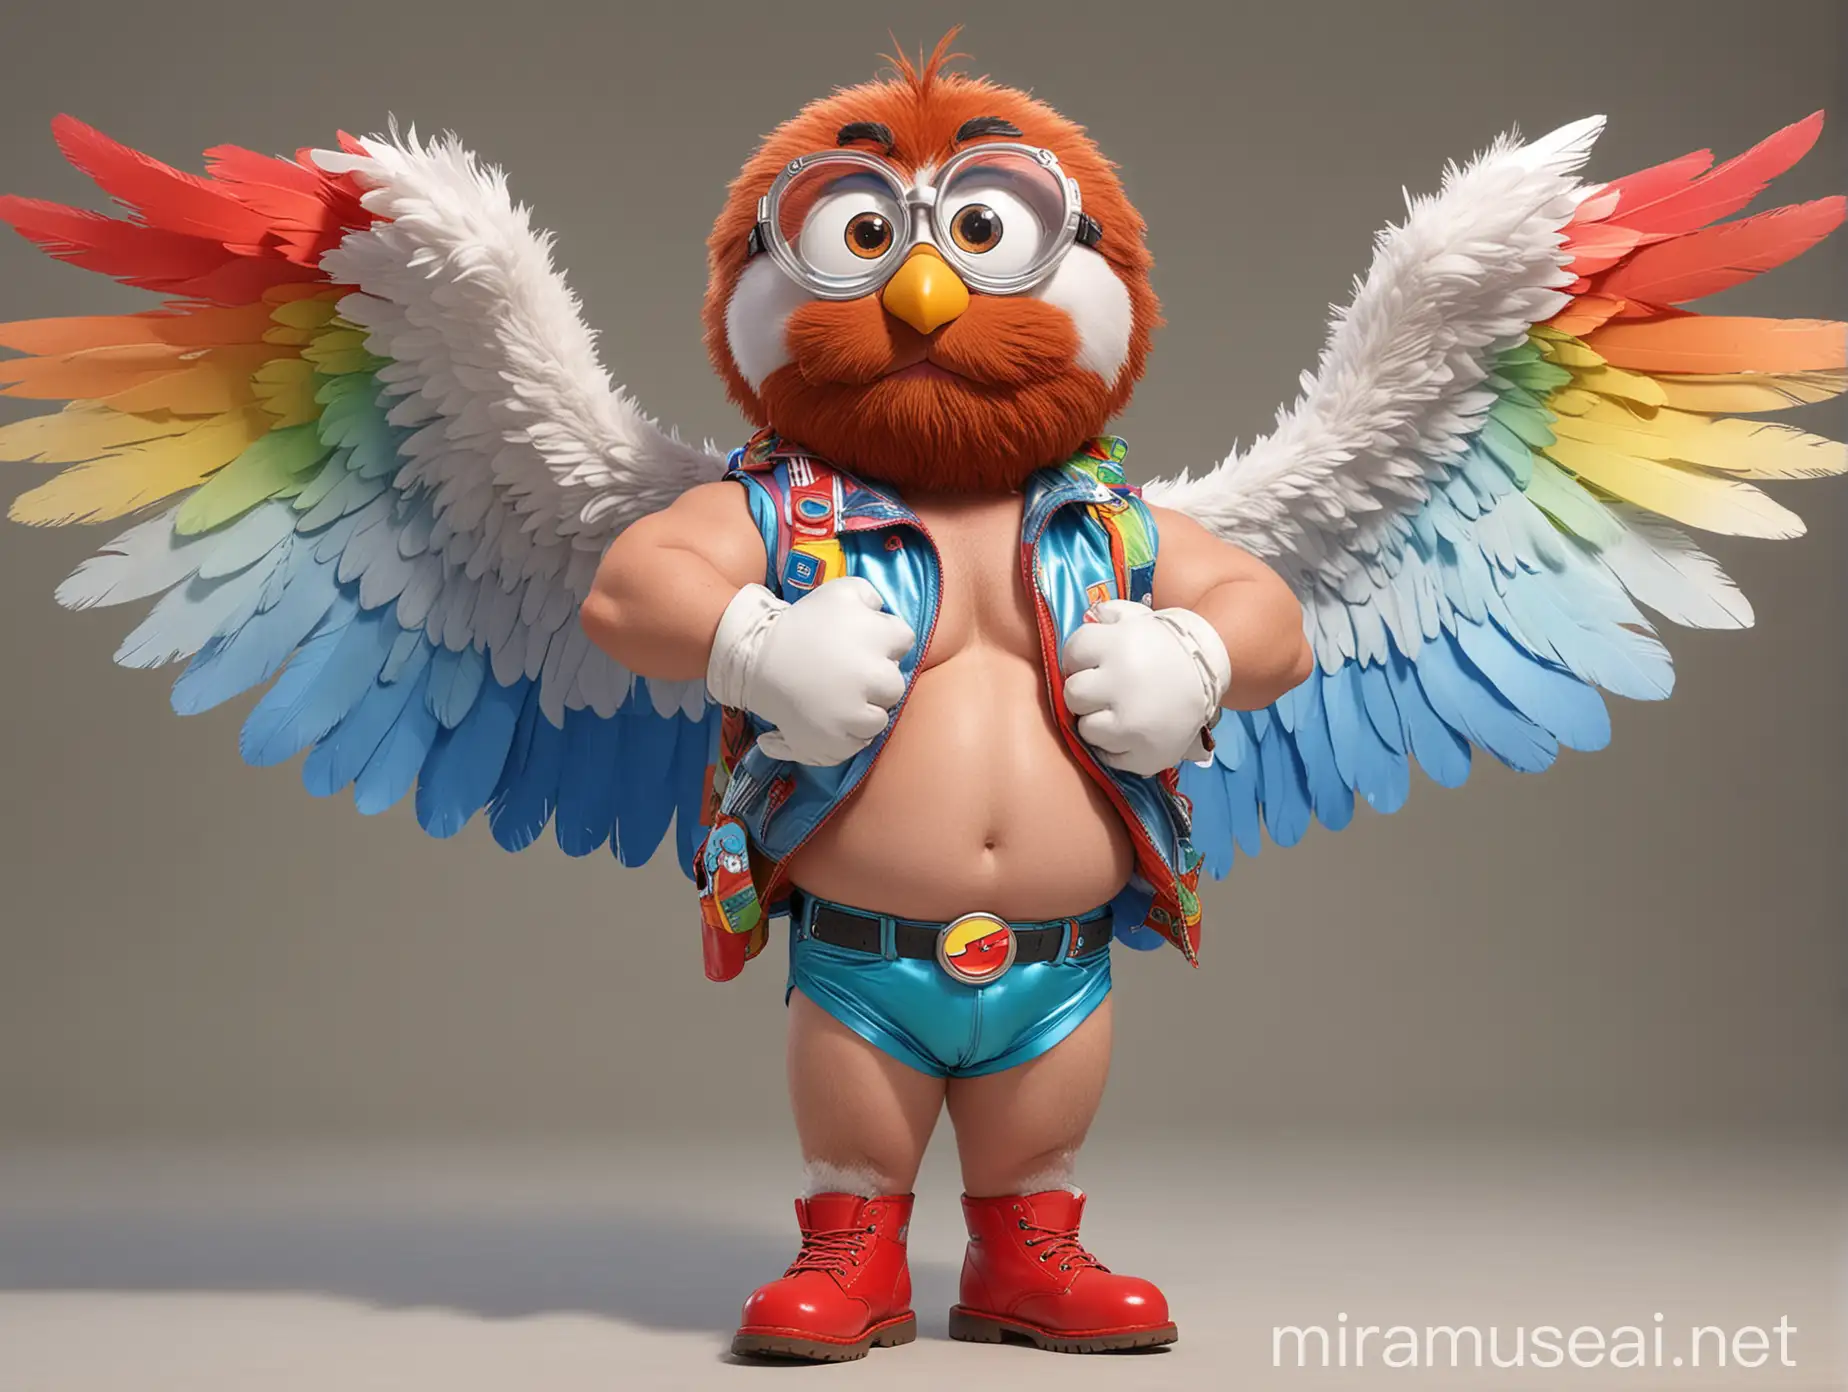 Big Eyes Subtle Smile Topless 40s Ultra beefy Red Head Bodybuilder Daddy with Beard Wearing Multi-Highlighter Bright Rainbow Colored See Through huge Eagle Wings Shoulder Jacket short shorts long legs short boots Flexing his Big Strong Arm Up with Doraemon Goggles